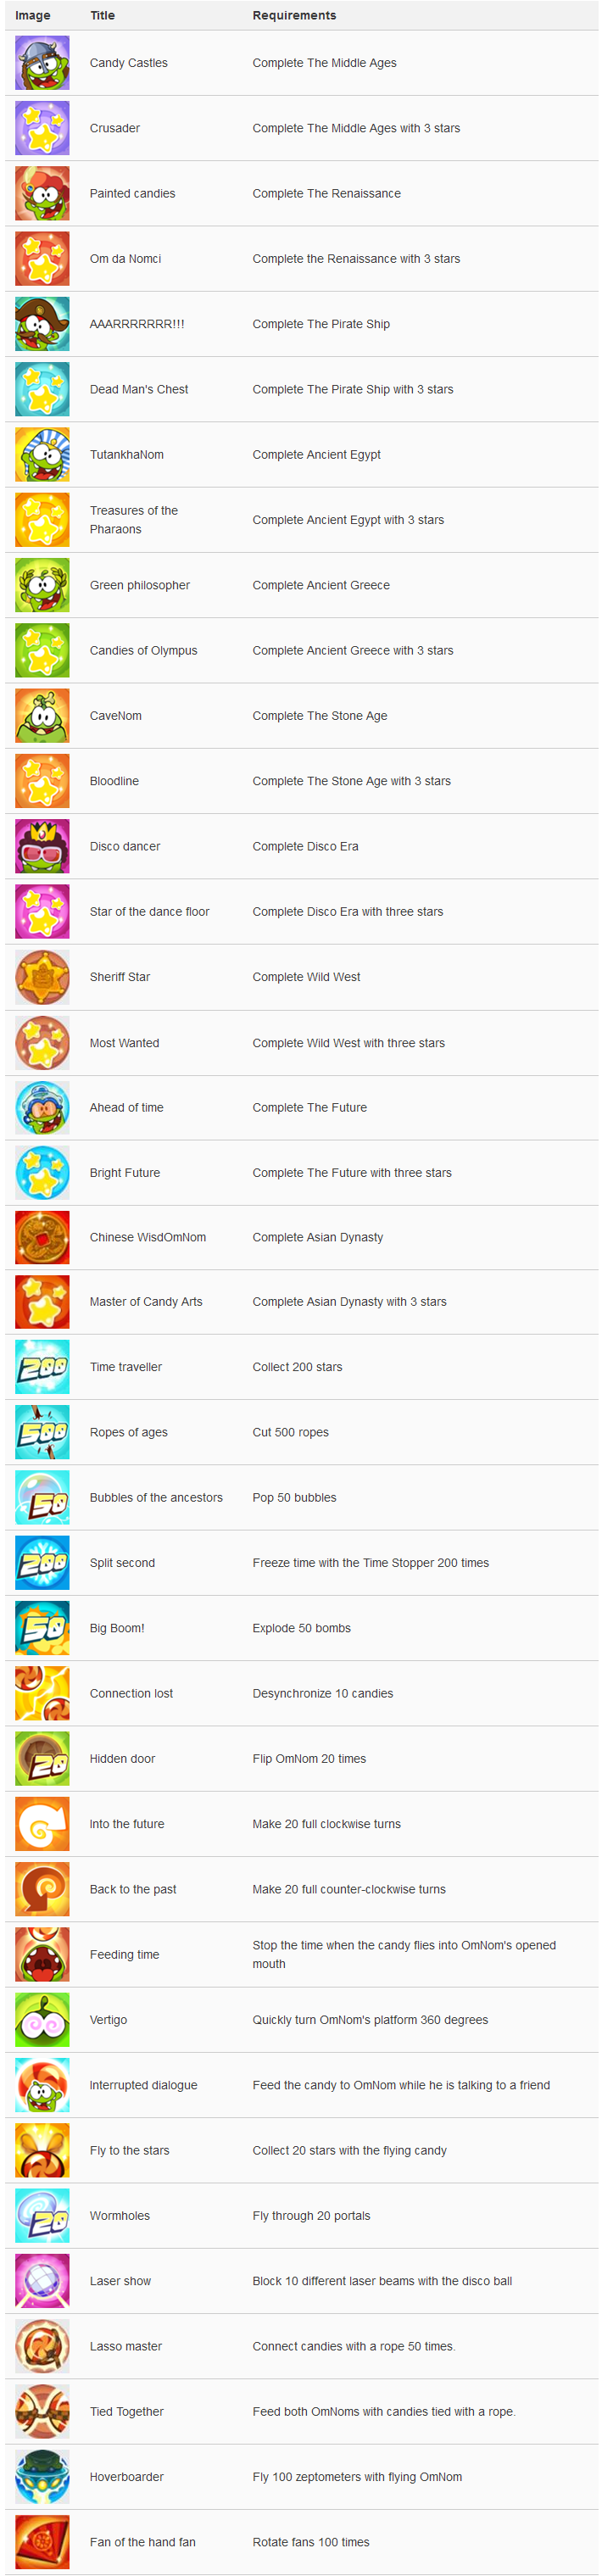 Feed Om Nom: A Guide to Playing Cut the Rope